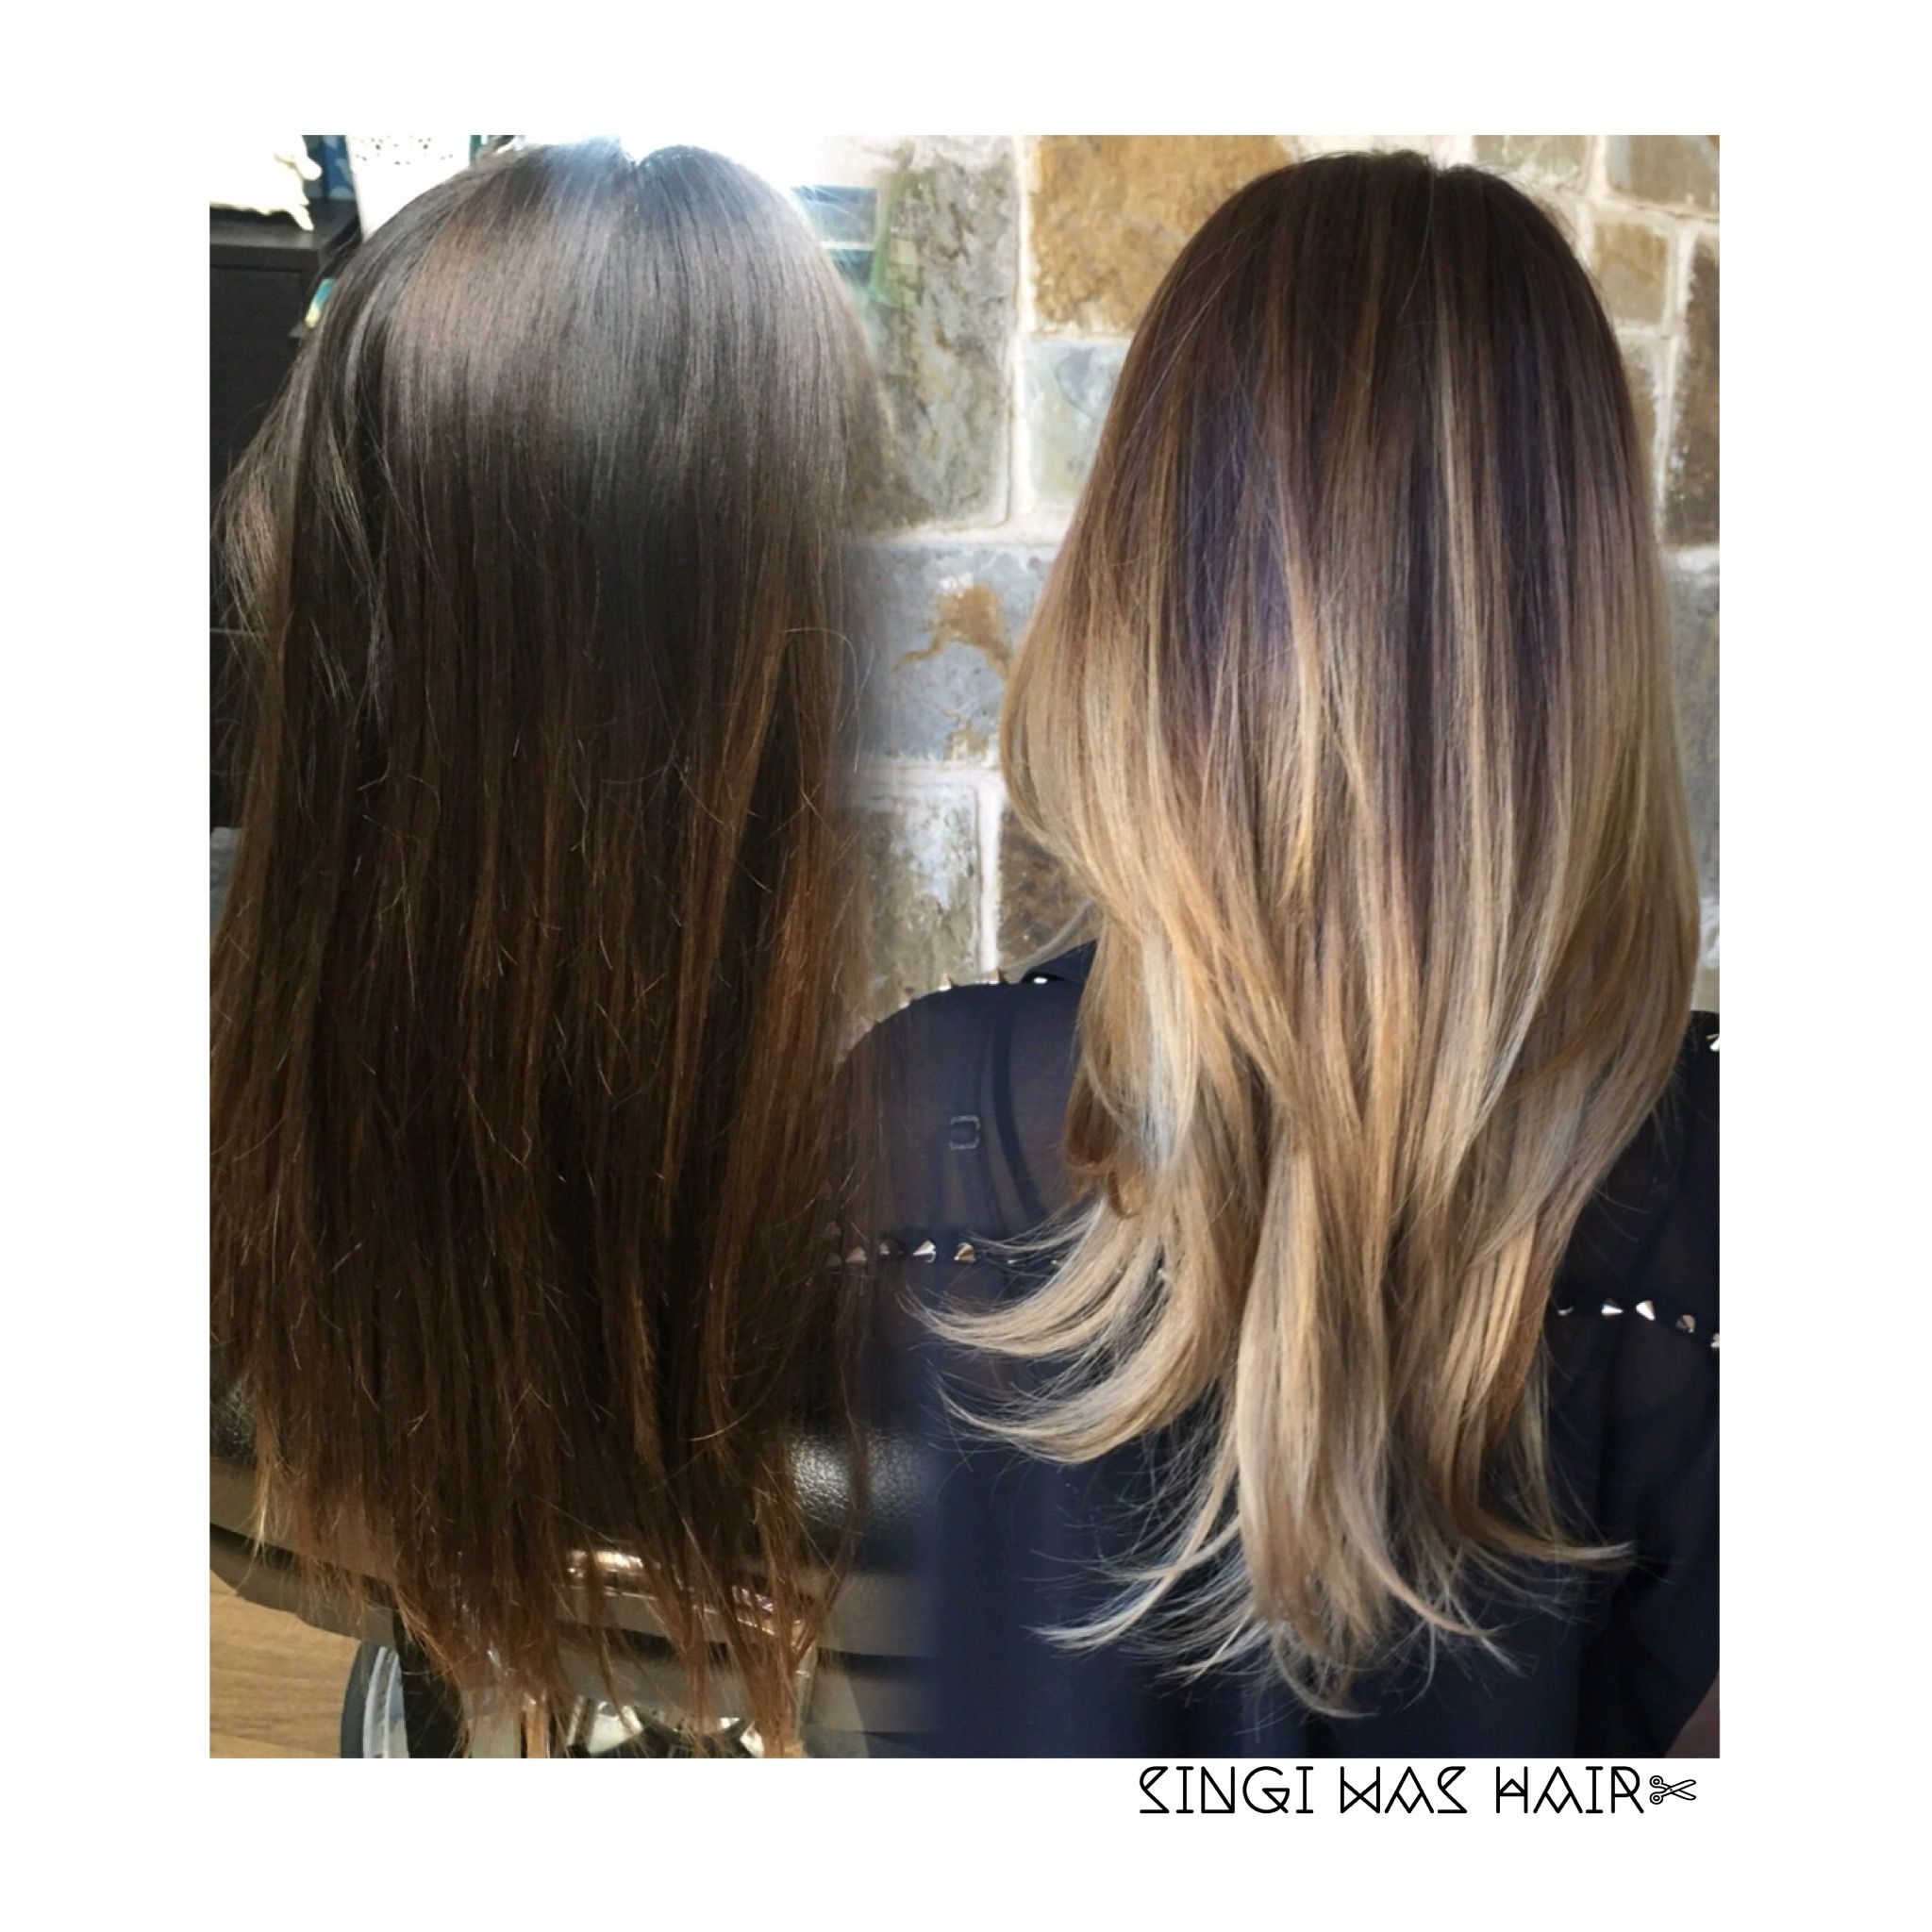 Asian Hair Balayage Ombre | The Art Of Hair// Instagram @singi.vo within Premier Asian Hair With Blonde Highlights